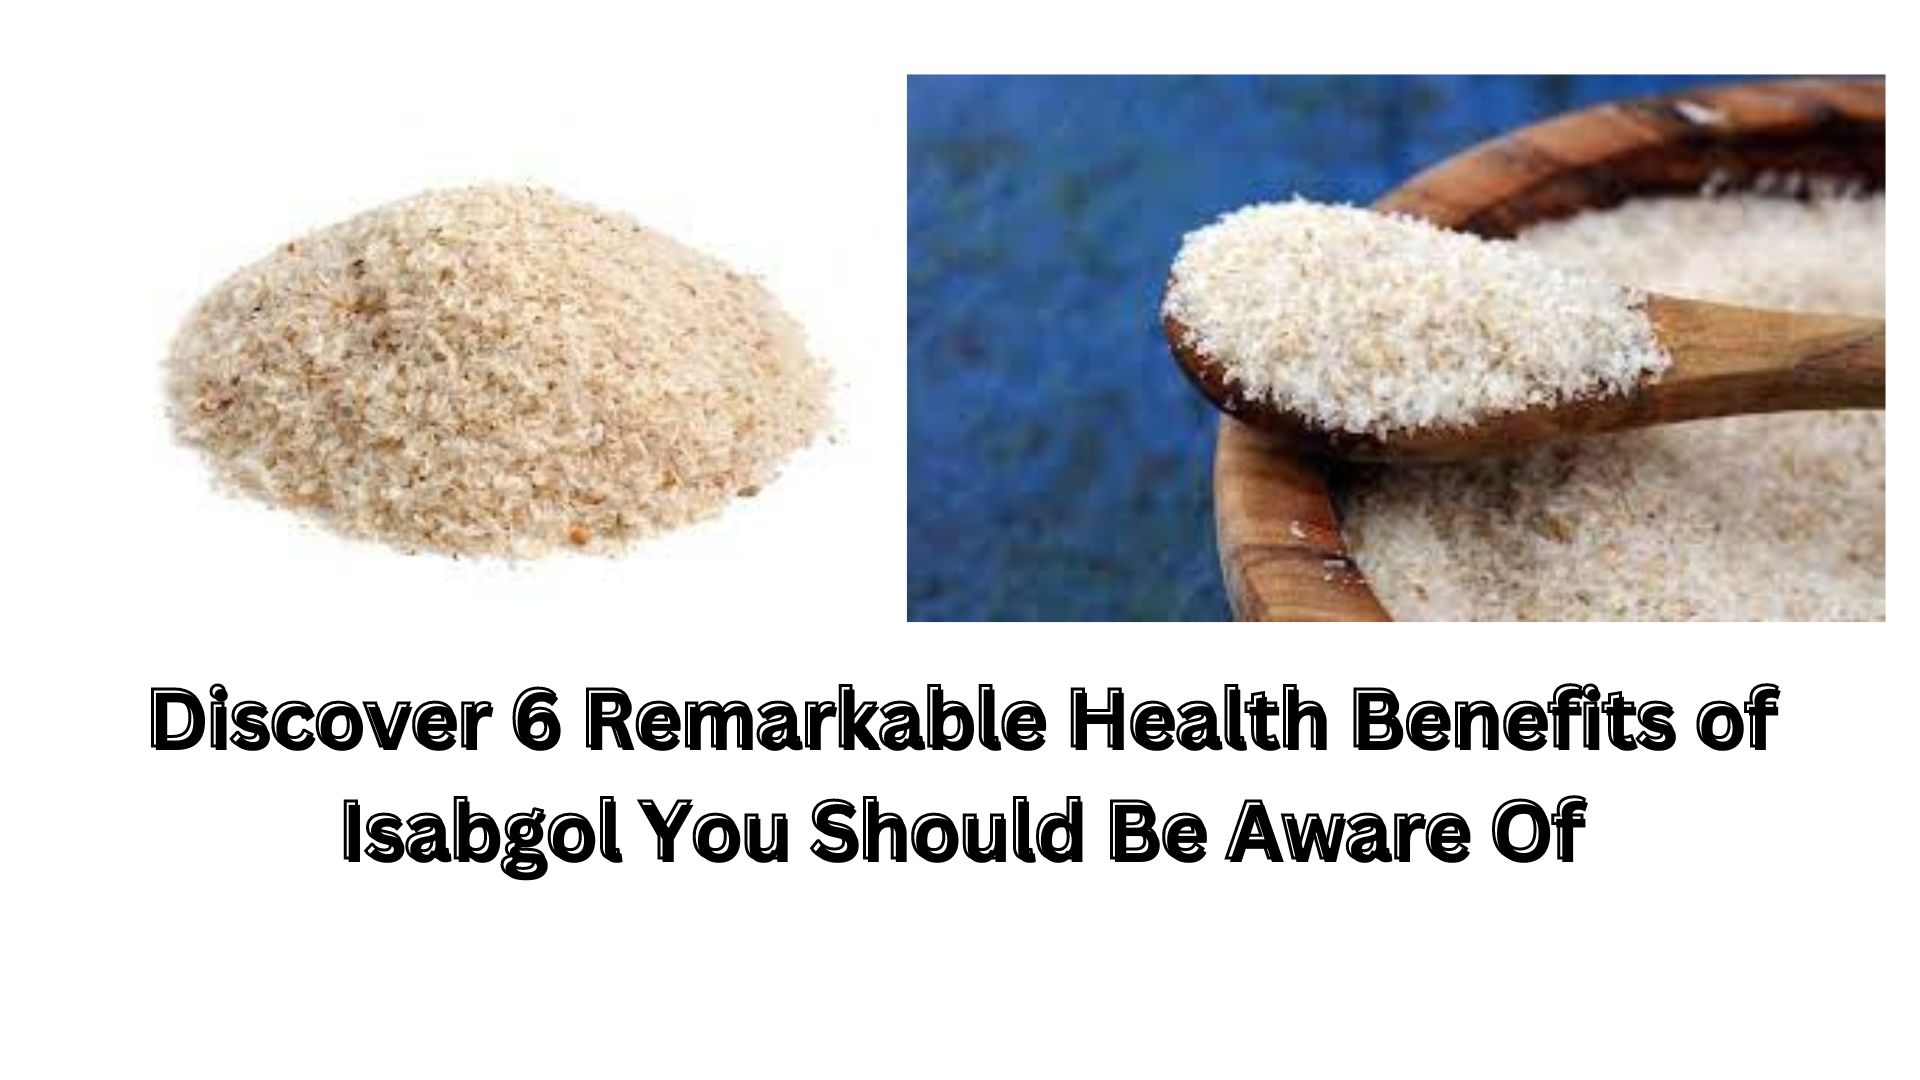 Discover 6 Remarkable Health Benefits of Isabgol You Should Be Aware Of